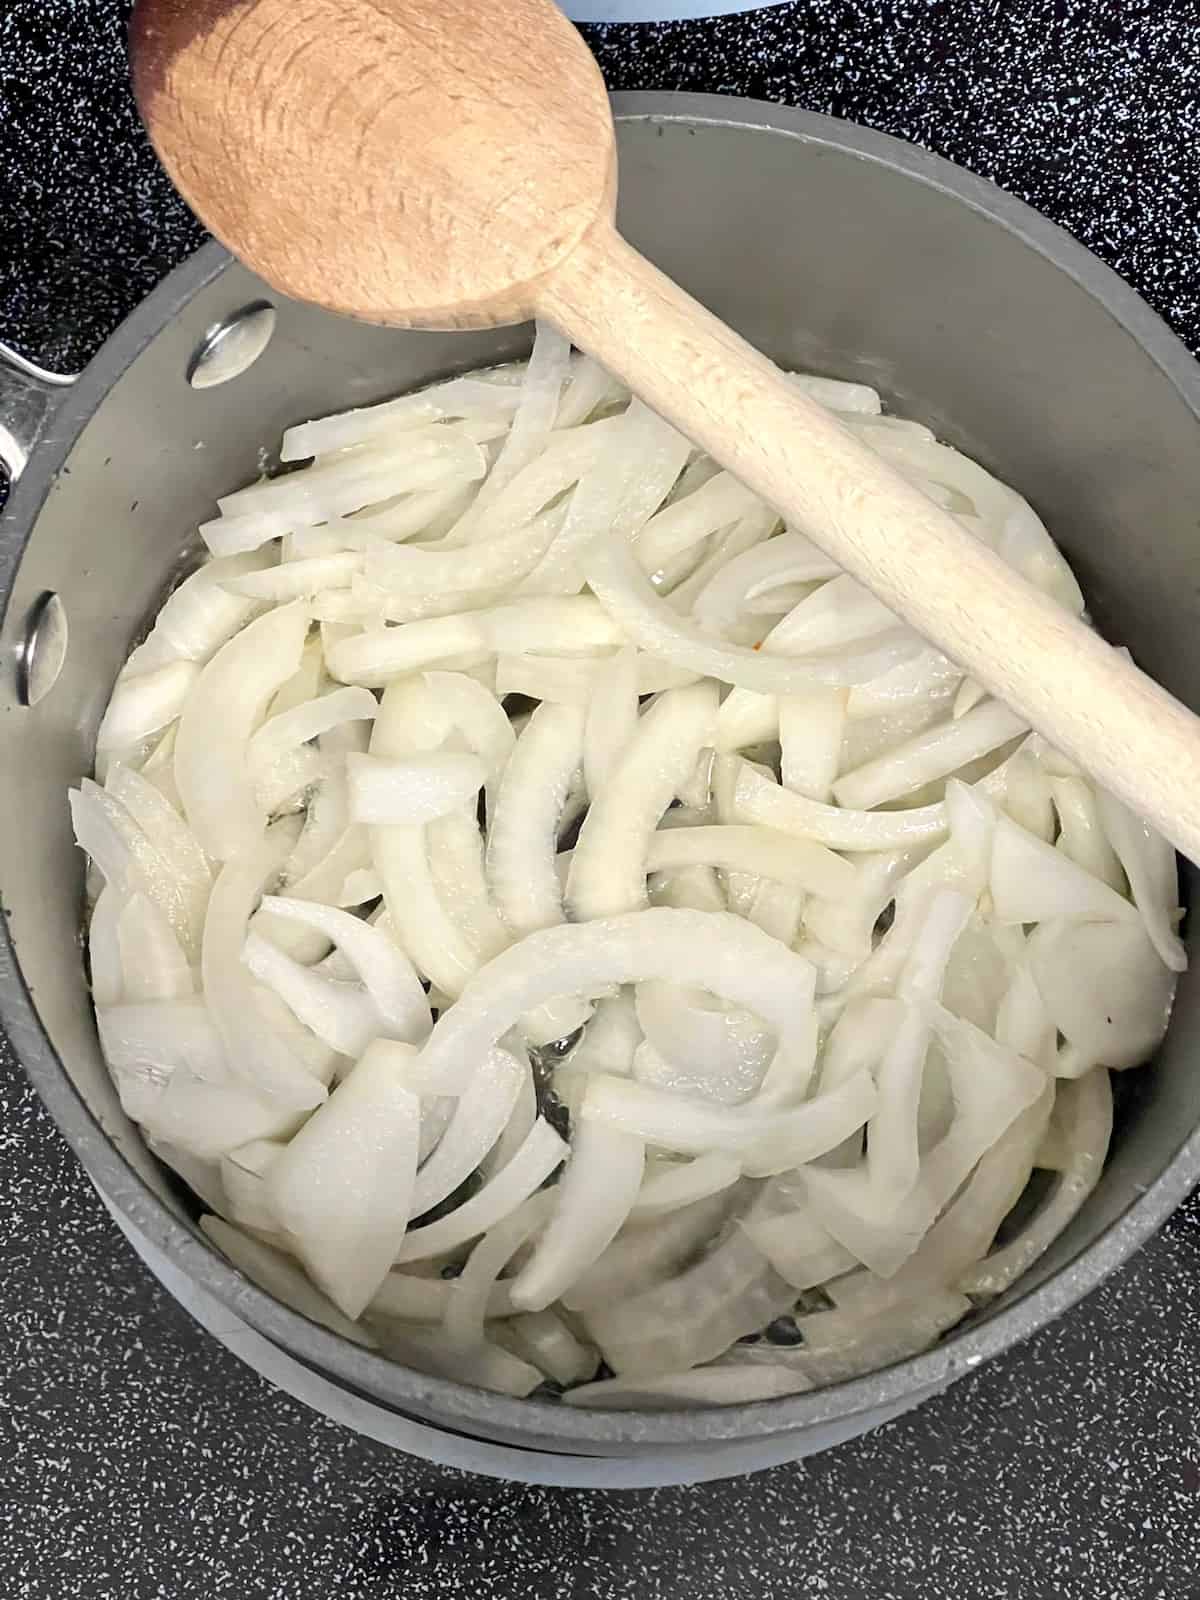 Just adding the onion to the butter.